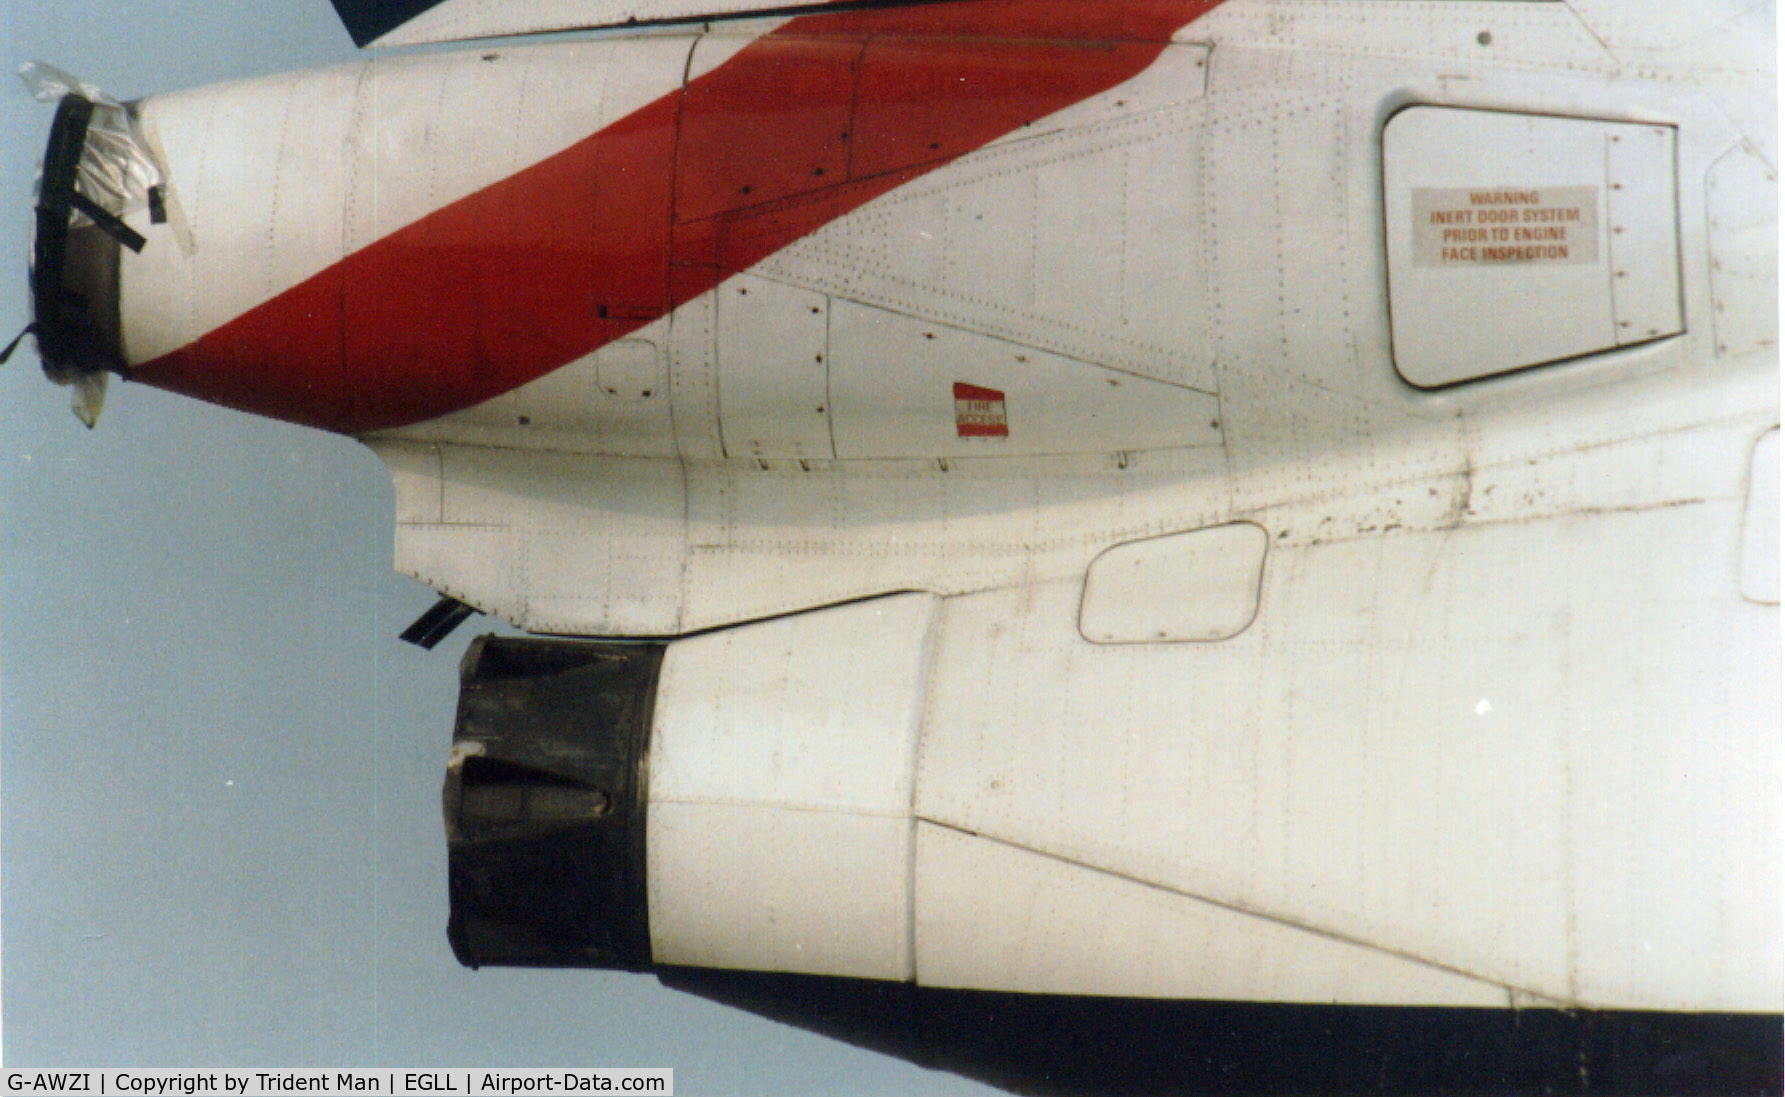 G-AWZI, 1971 Hawker Siddeley HS-121 Trident 3B-101 C/N 2310, Close up of the boost engine area.